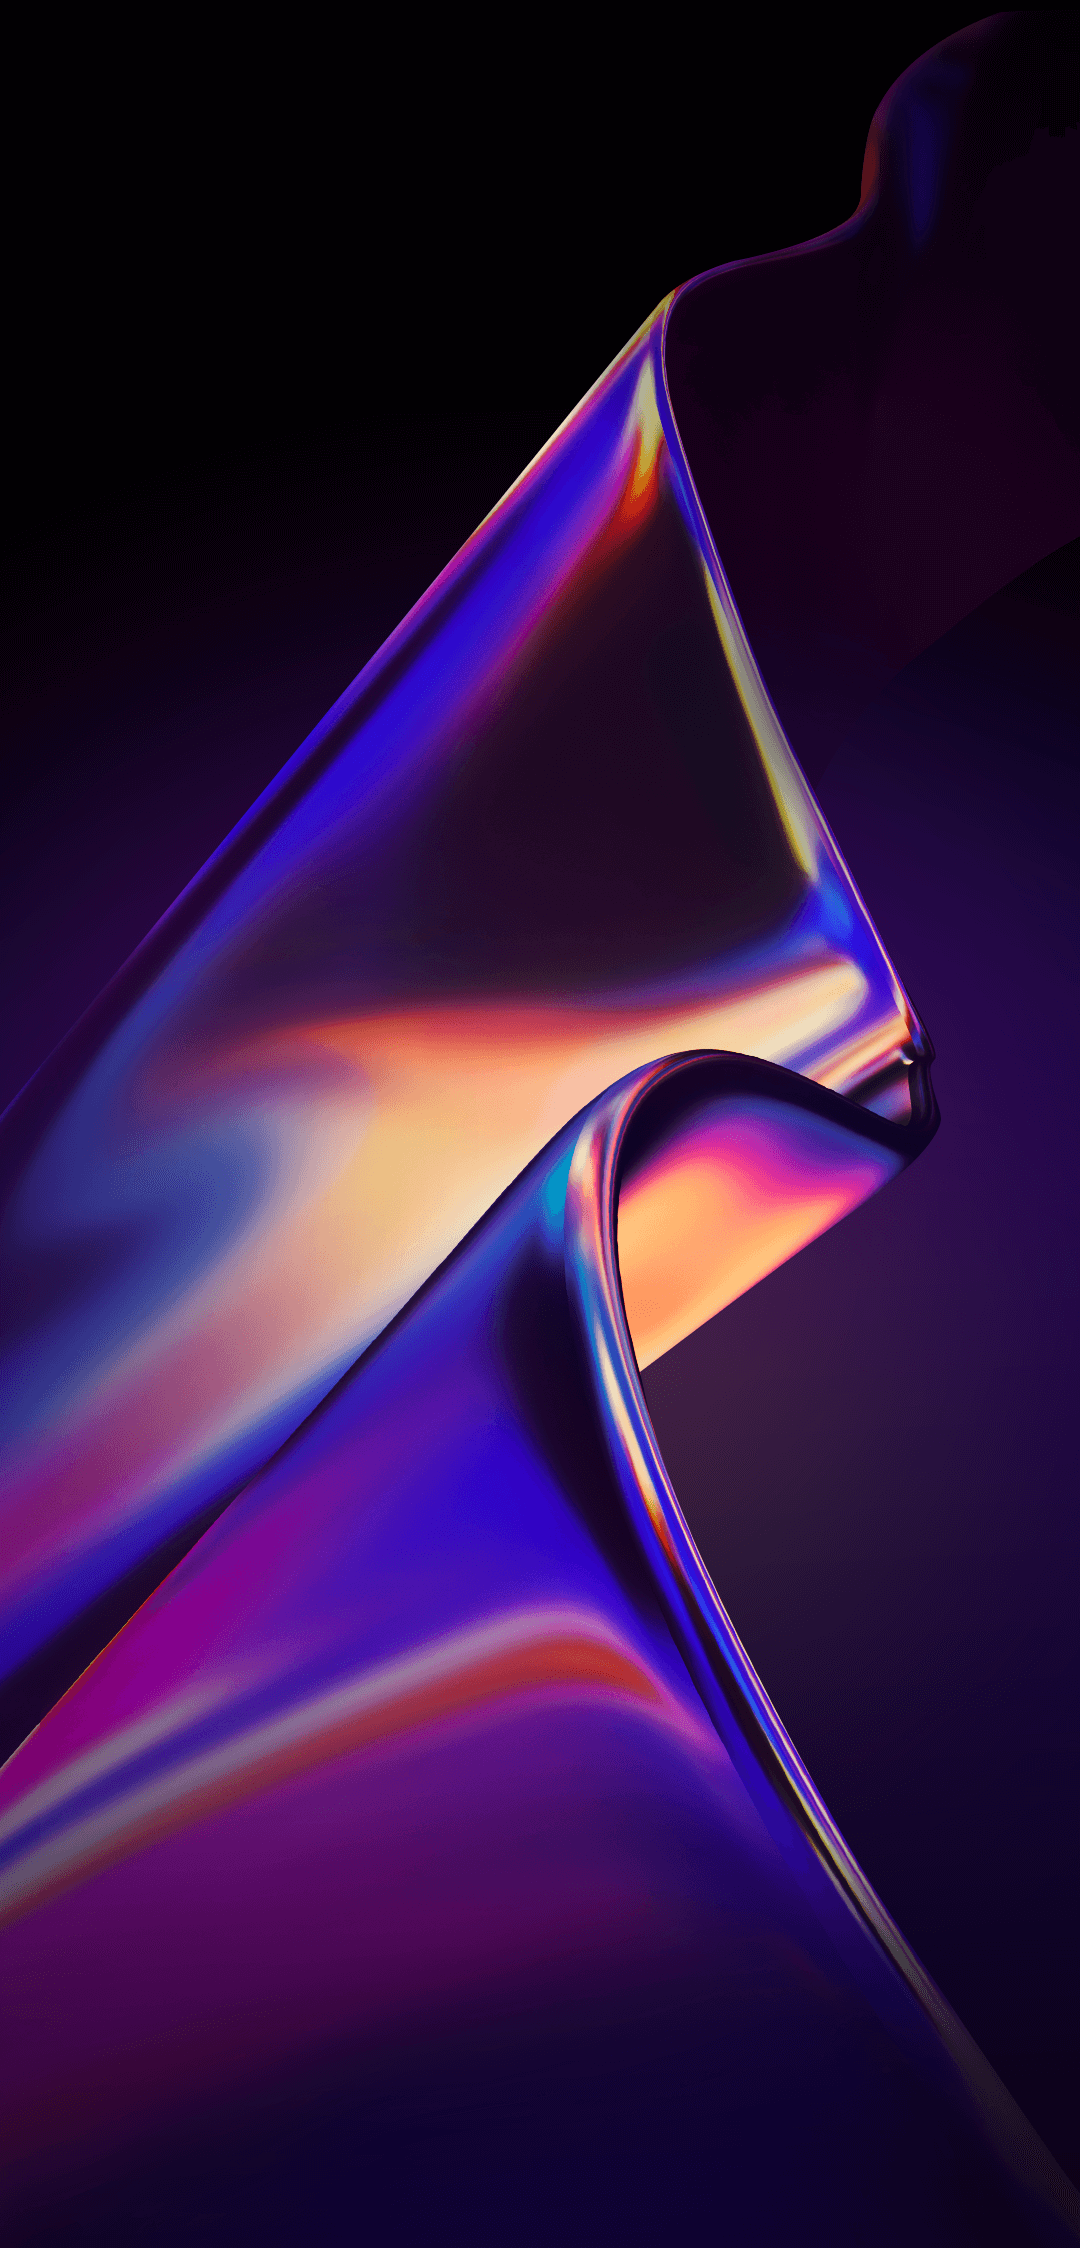 Download Oppo Reno 2 Official Wallpaper Here! Full HD Resolution